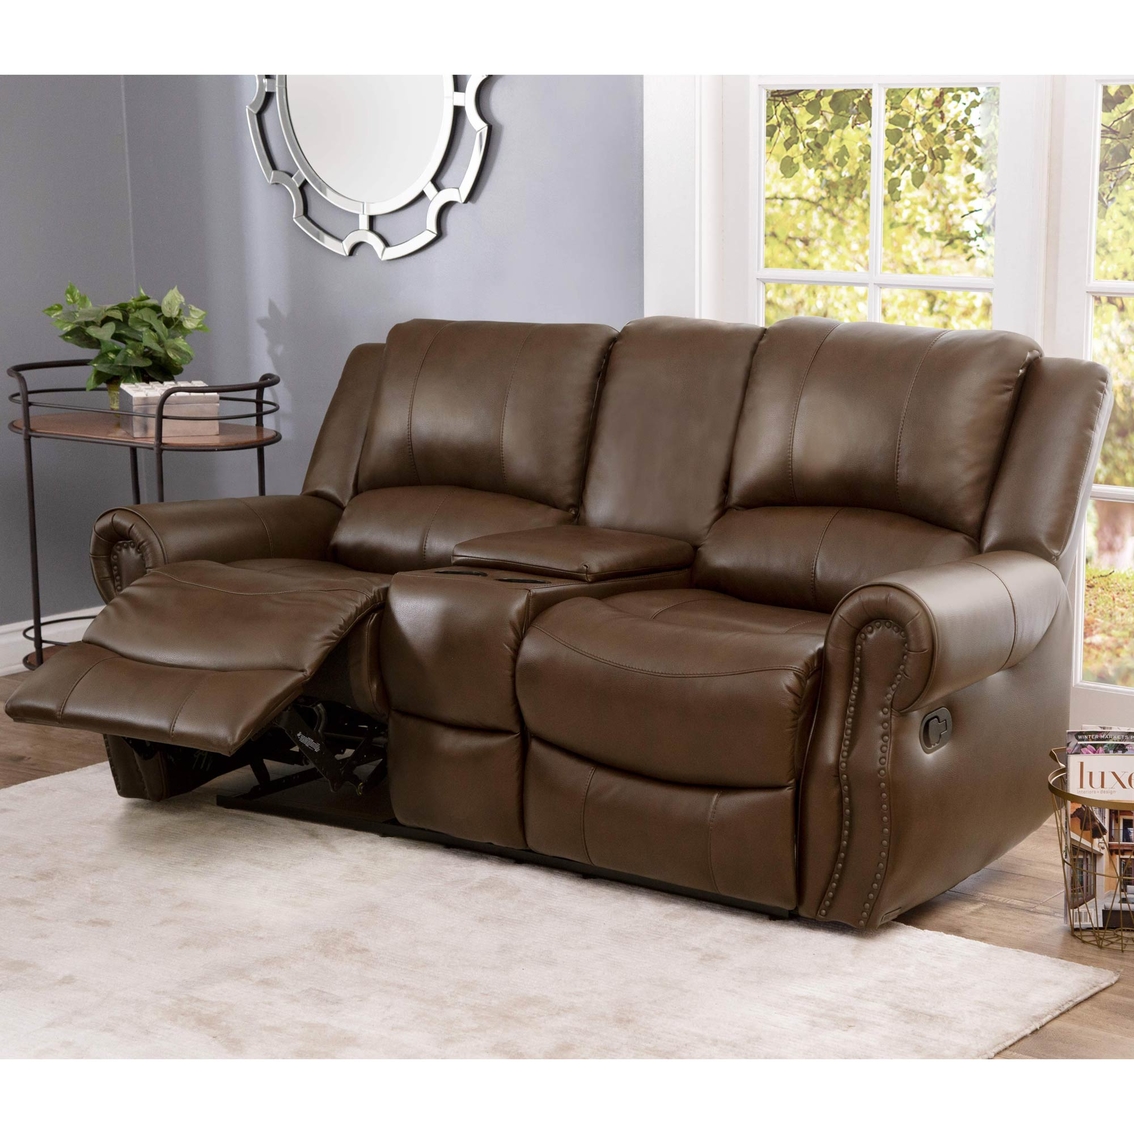 Abbyson Living Calabasas Leather Reclining, 3 pc. Set - Image 3 of 9